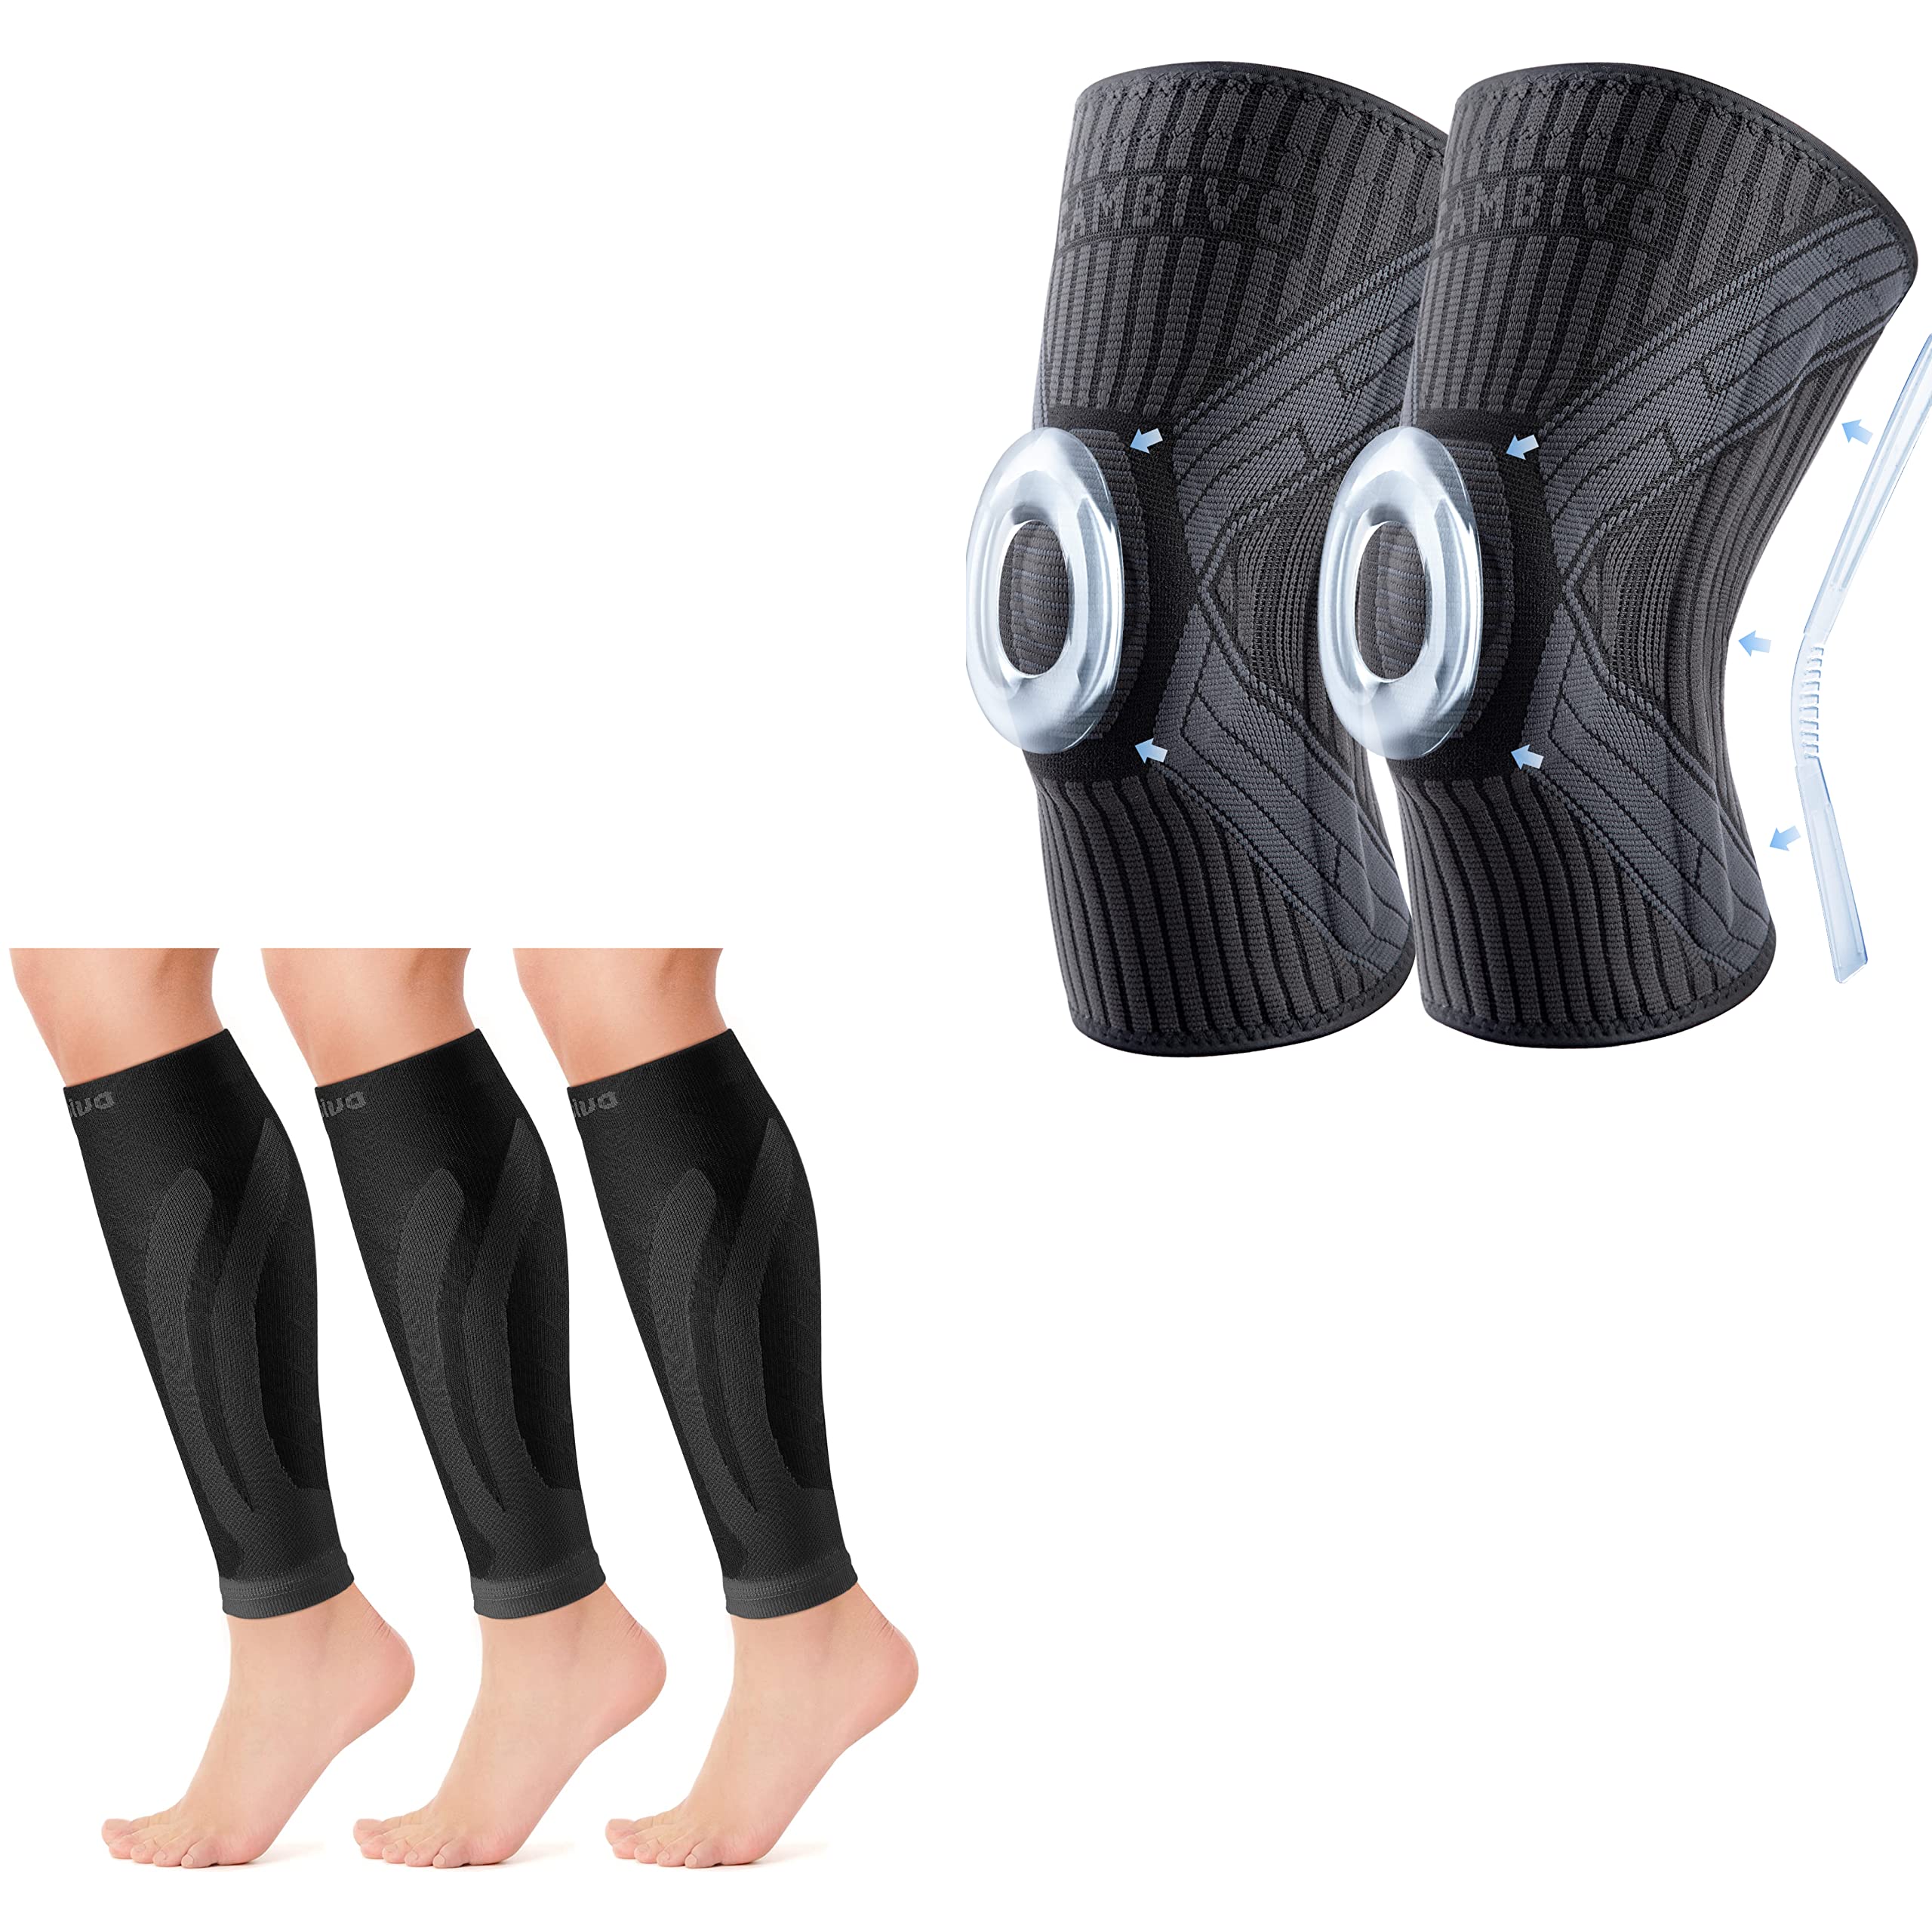 CAMBIVO Knee Braces for Knee Pain with Patella Gel Pads & Side